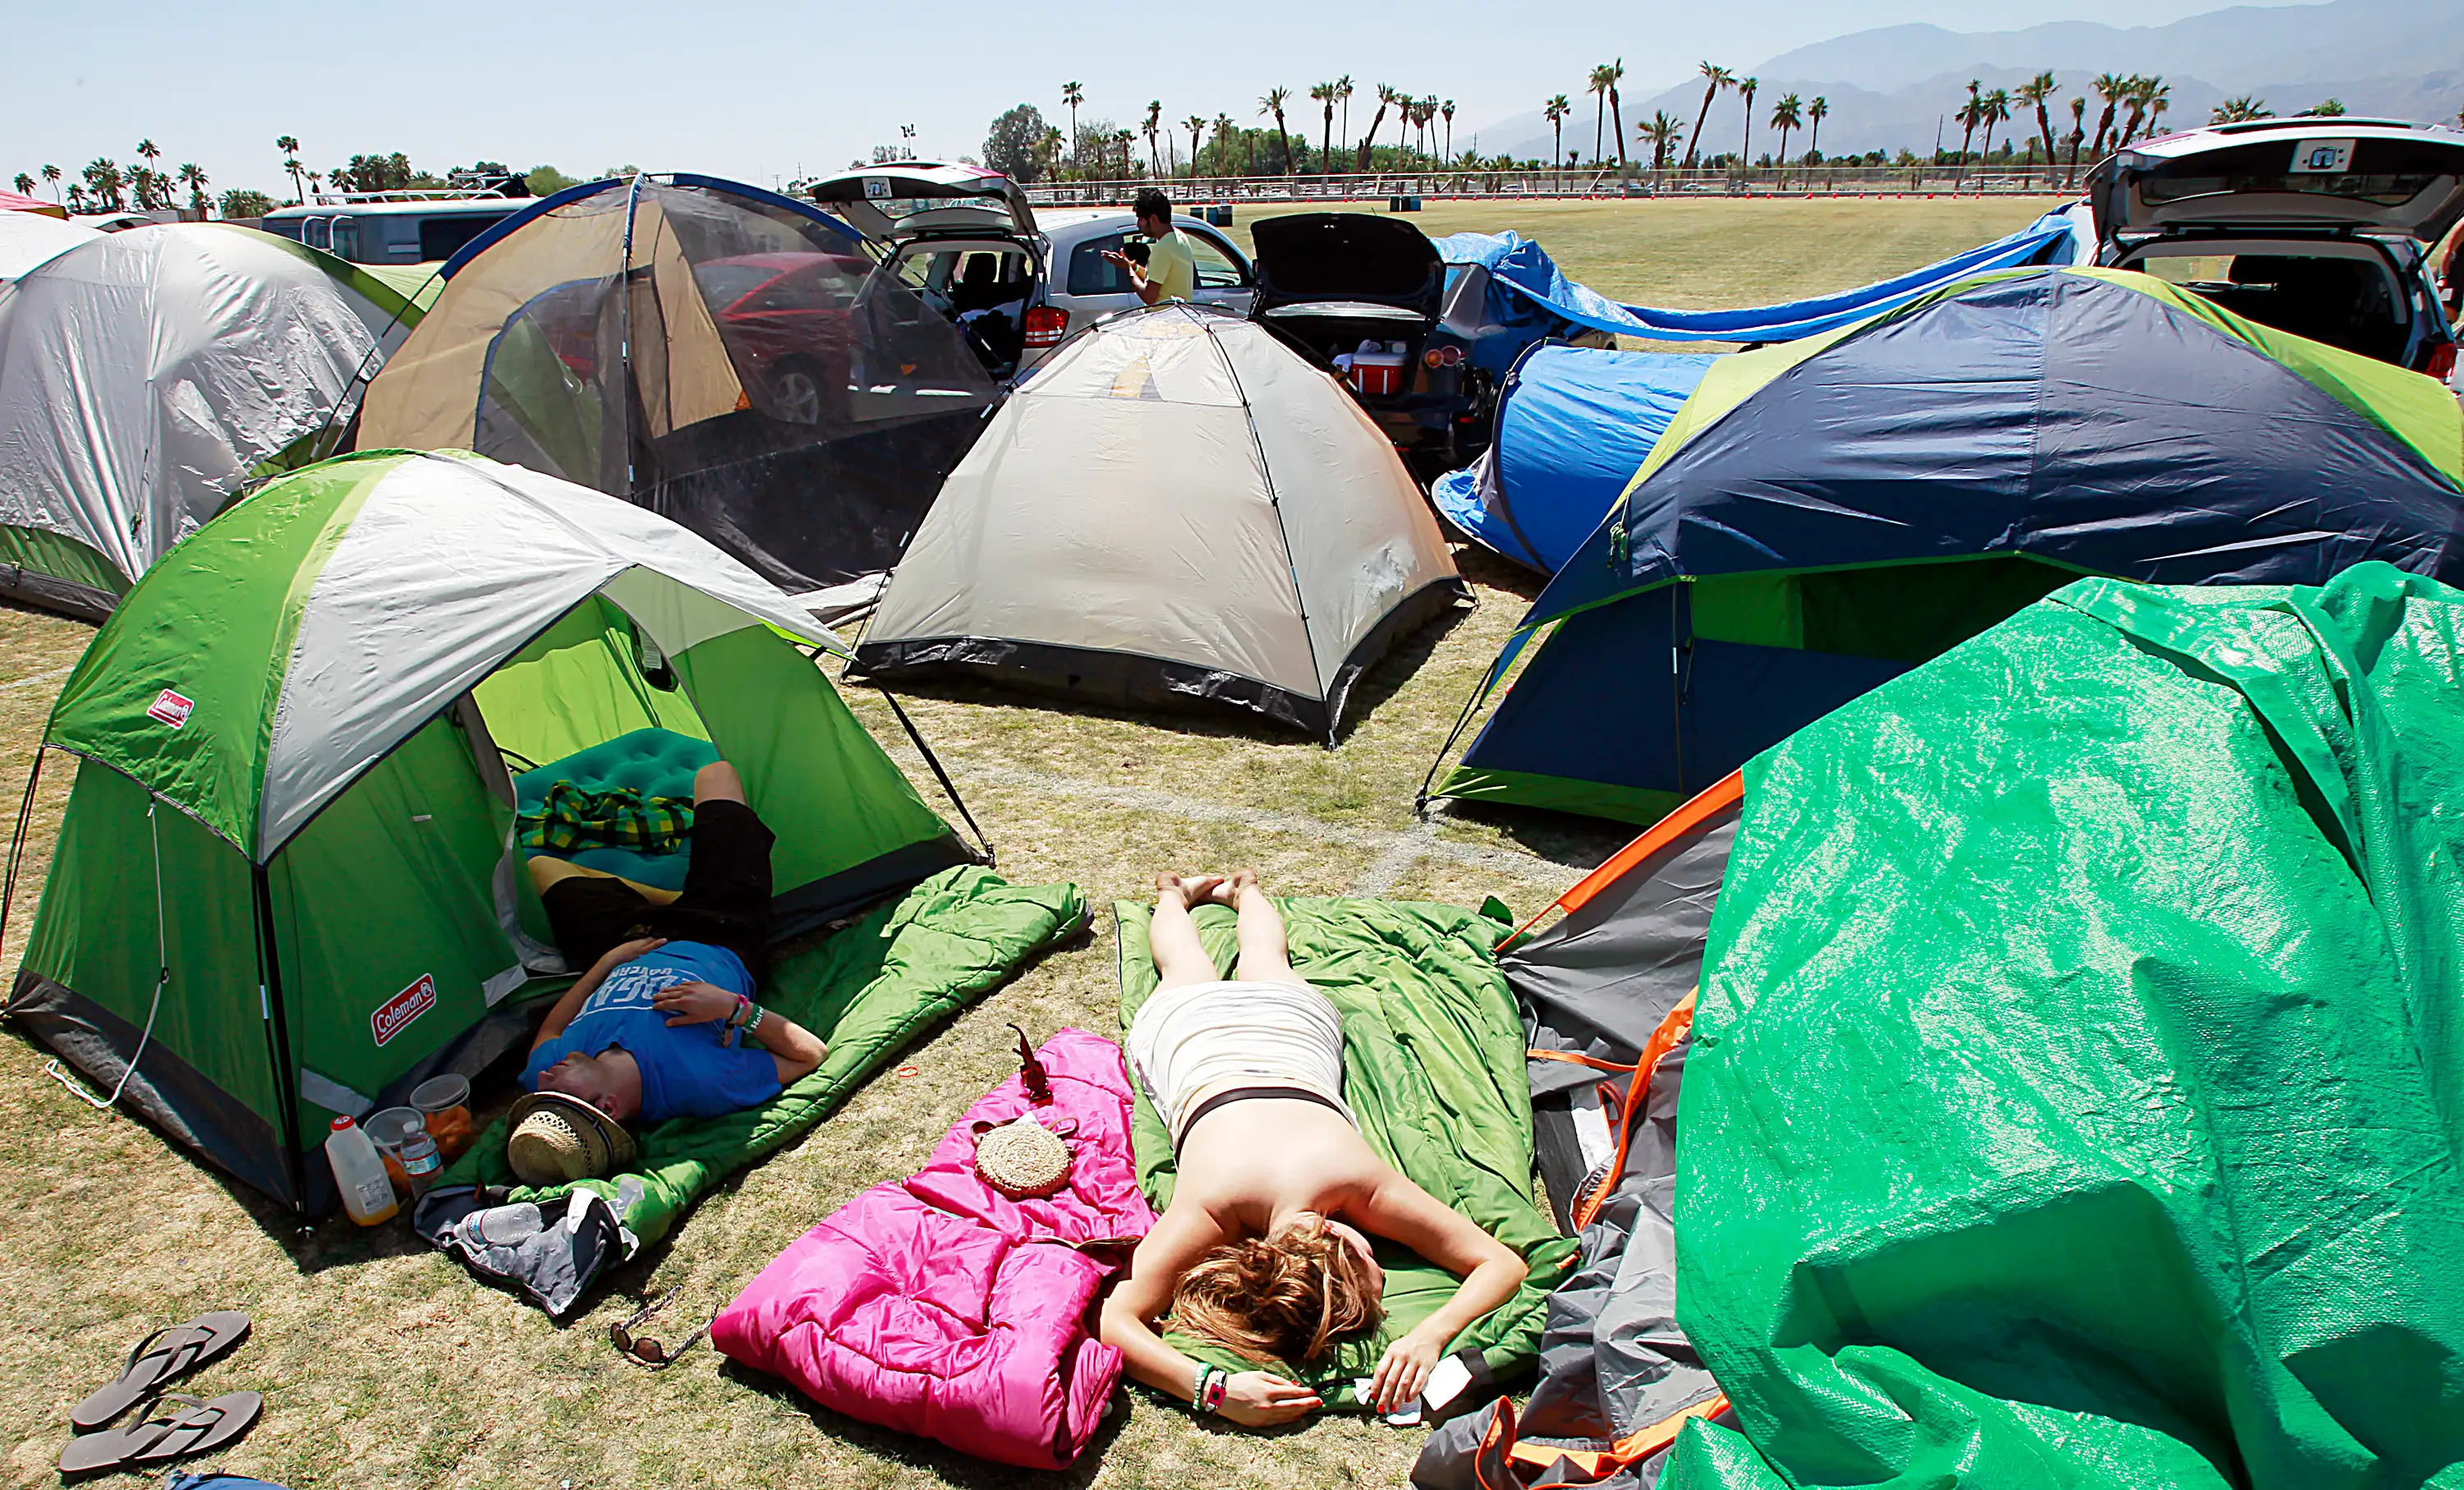 Festivalgoers get some sun and sleep at an onsite campground Sunday, April 17, 2011, at the Coachel